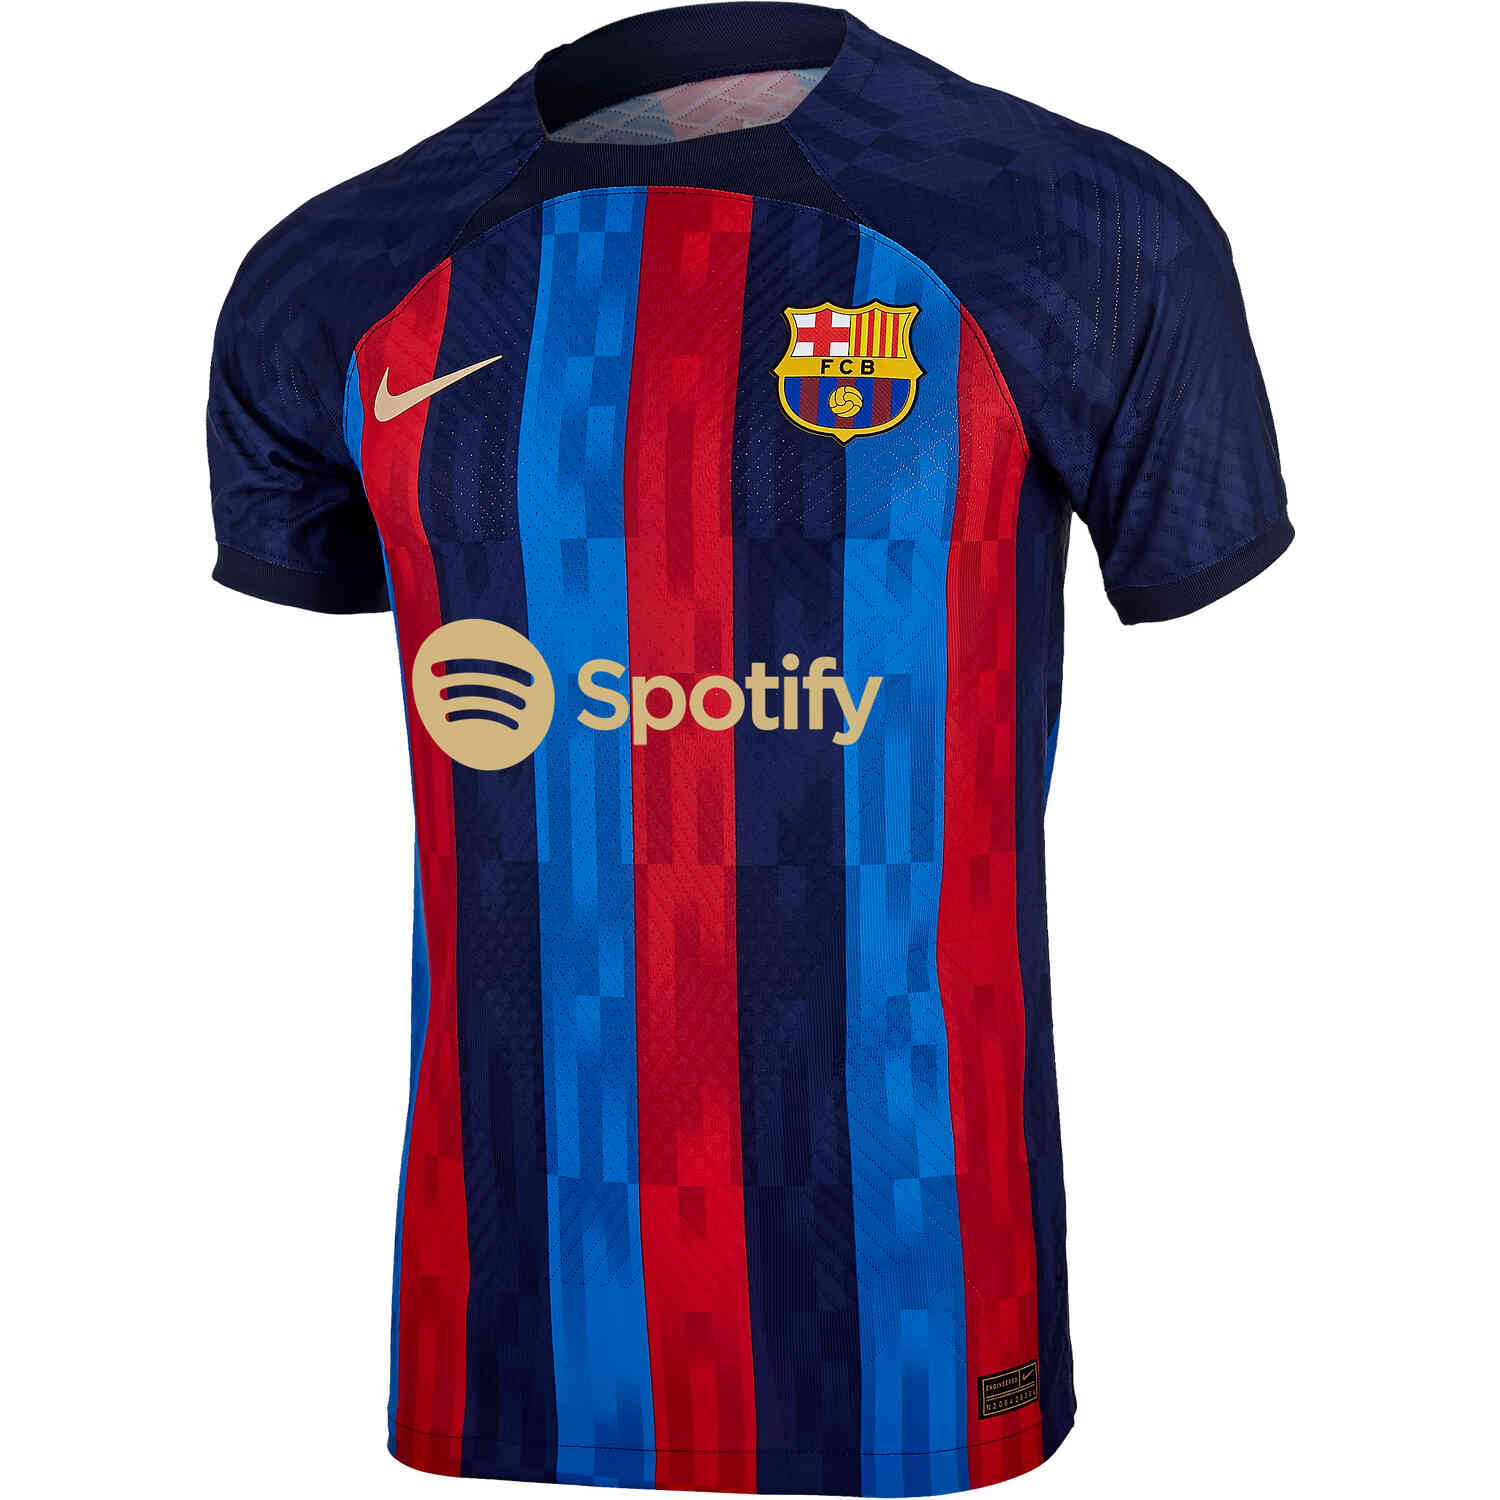 messi barcelona jersey authentic